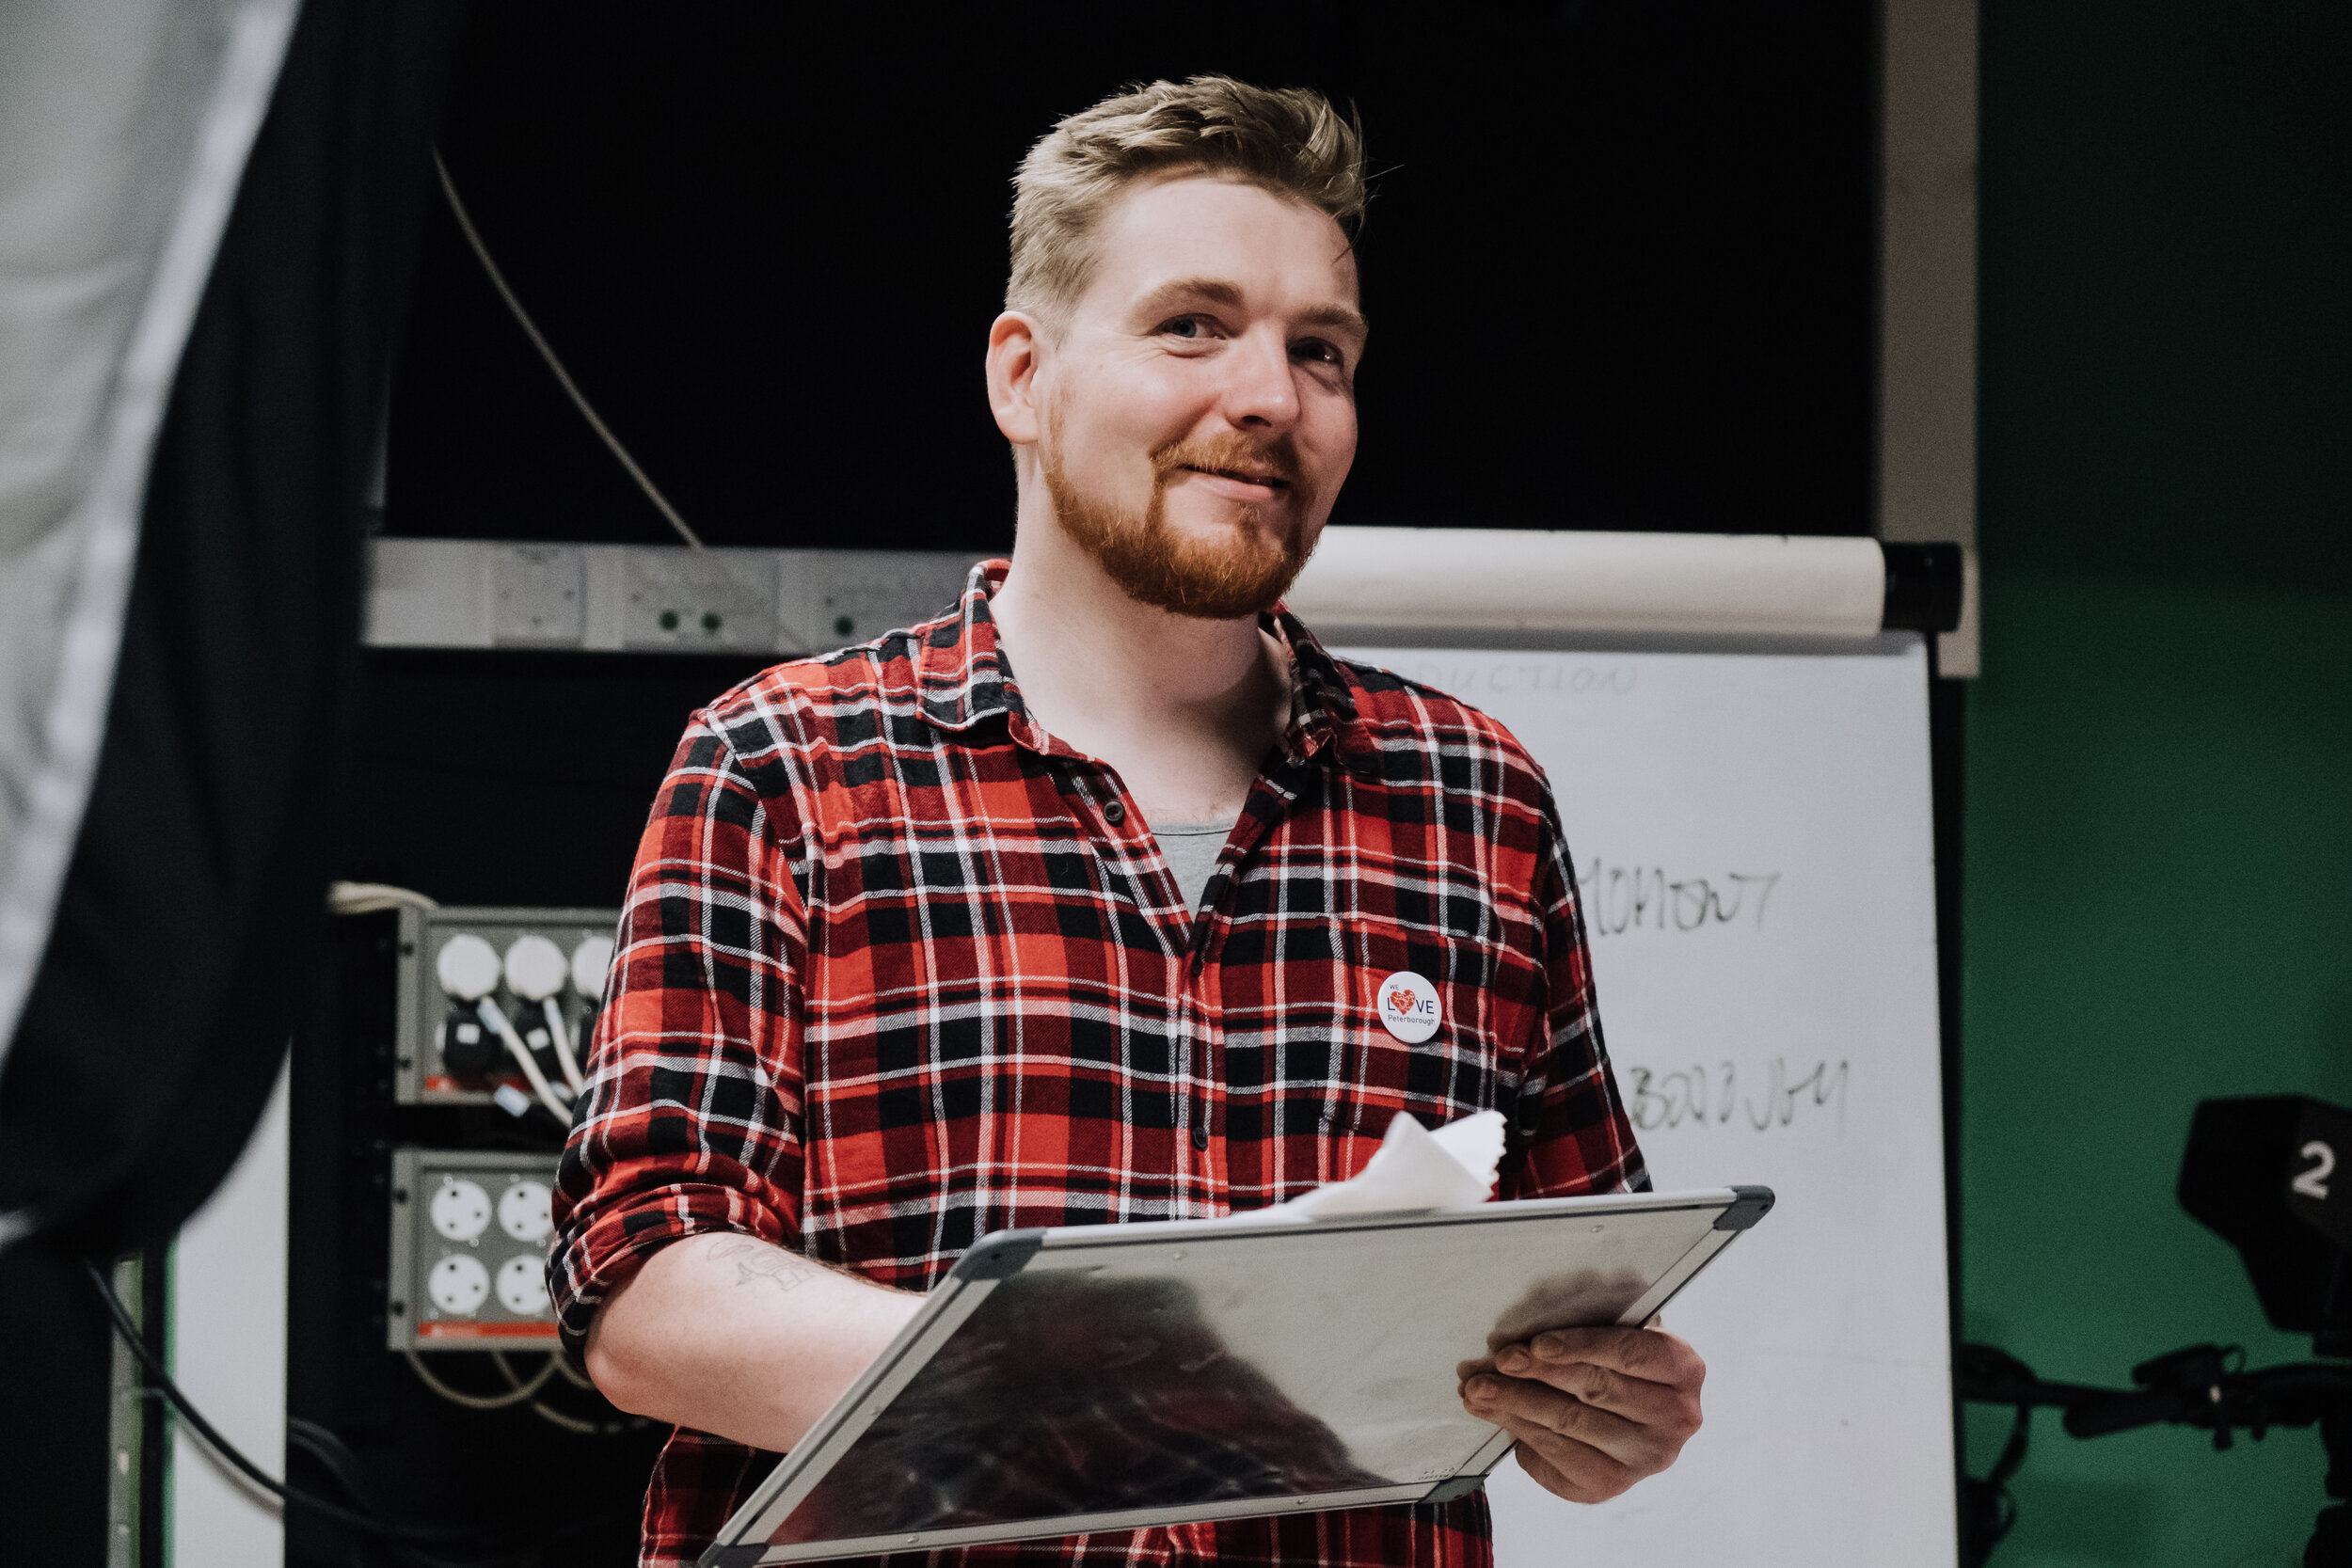 A image of a white man with reddish hair in a red plaid top stnading at what looks like a music stand. He has just caught sight of the camera, is looking directly at it, and smiling.